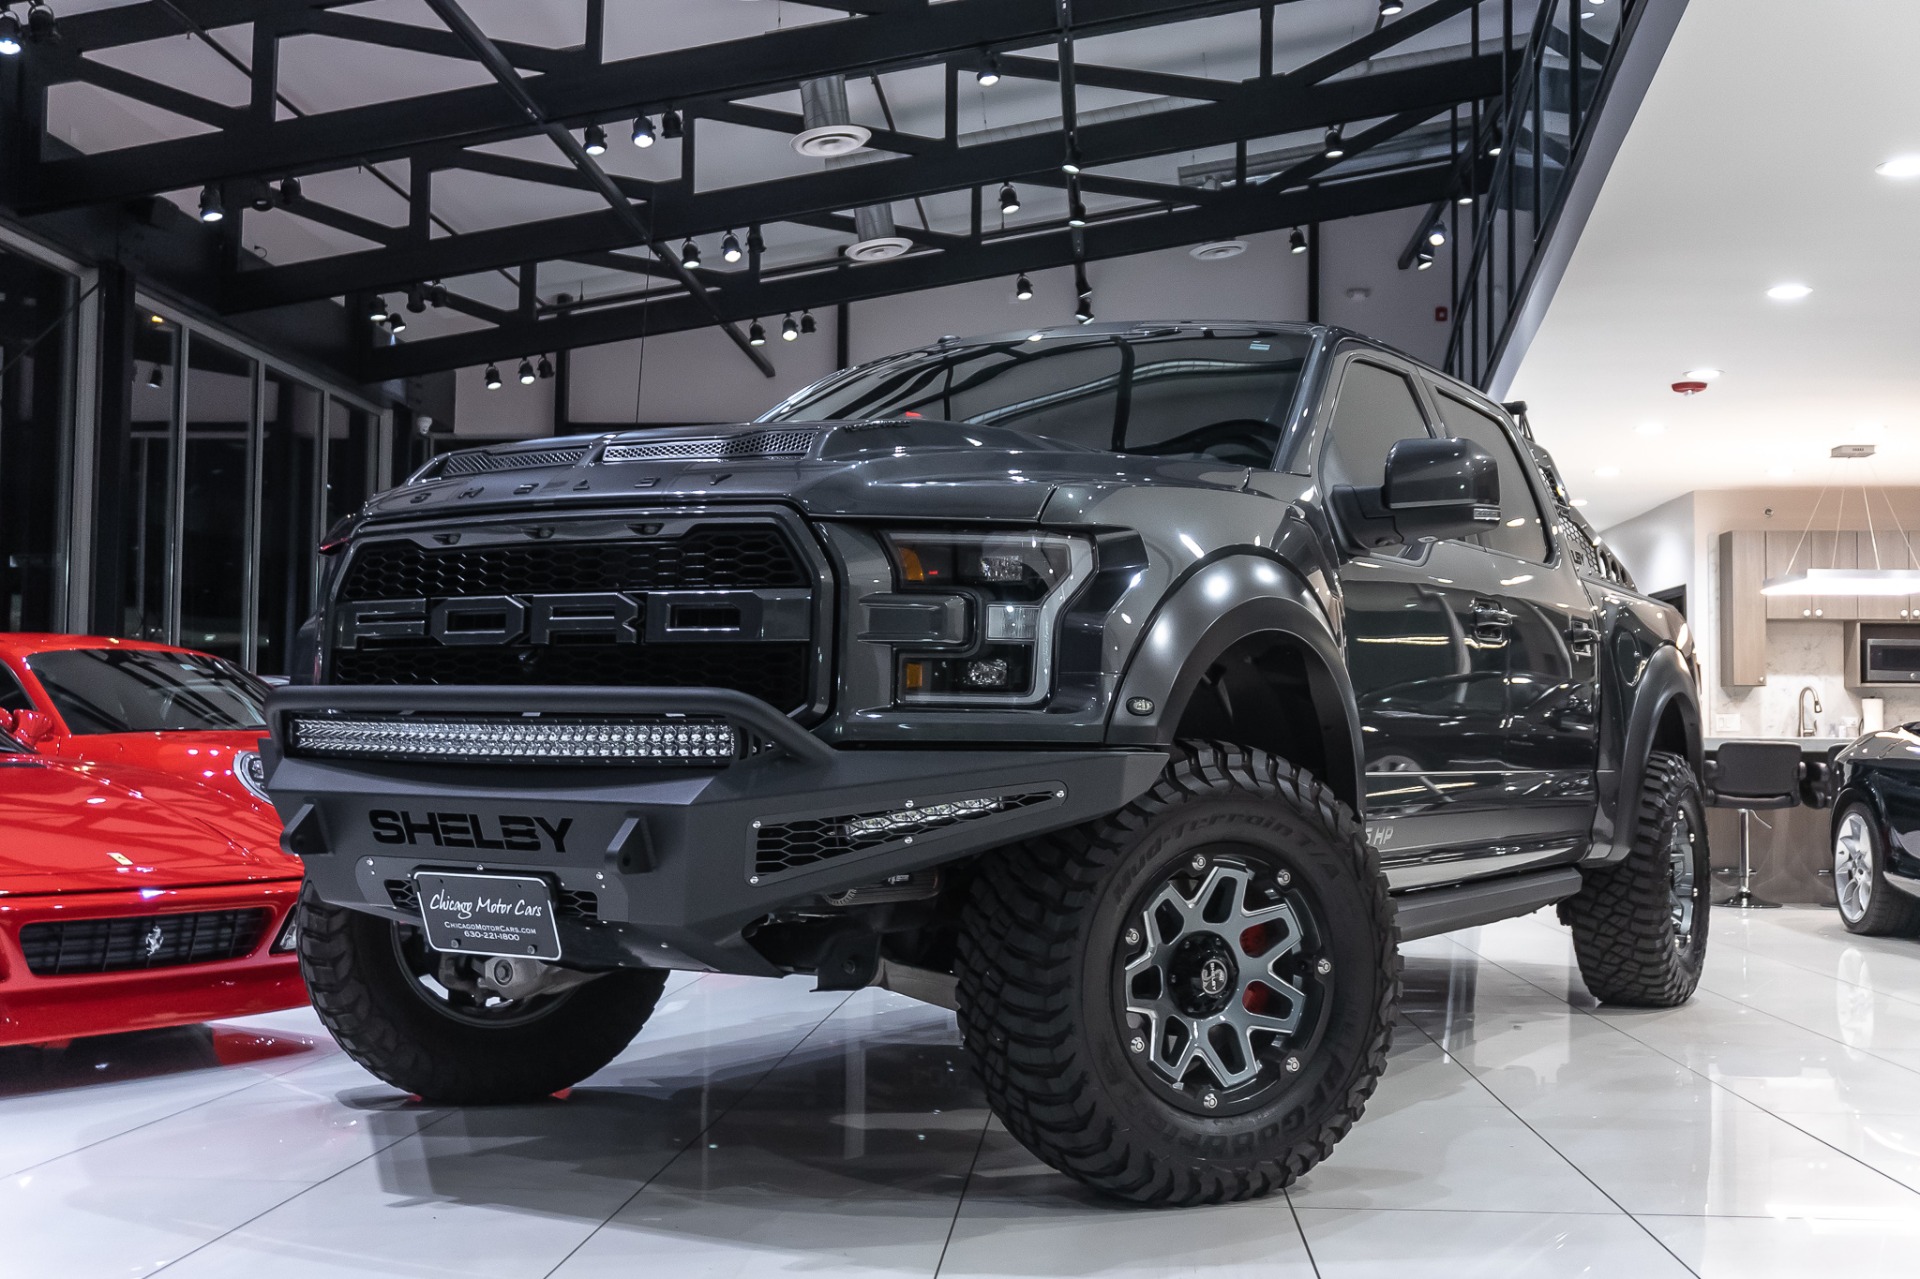 Used 2018 Ford F 150 Shelby Baja Raptor Tech Pkg 3 Stage 2 Shock System 525hp Only 9k Miles For Sale Special Pricing Chicago Motor Cars Stock 17434